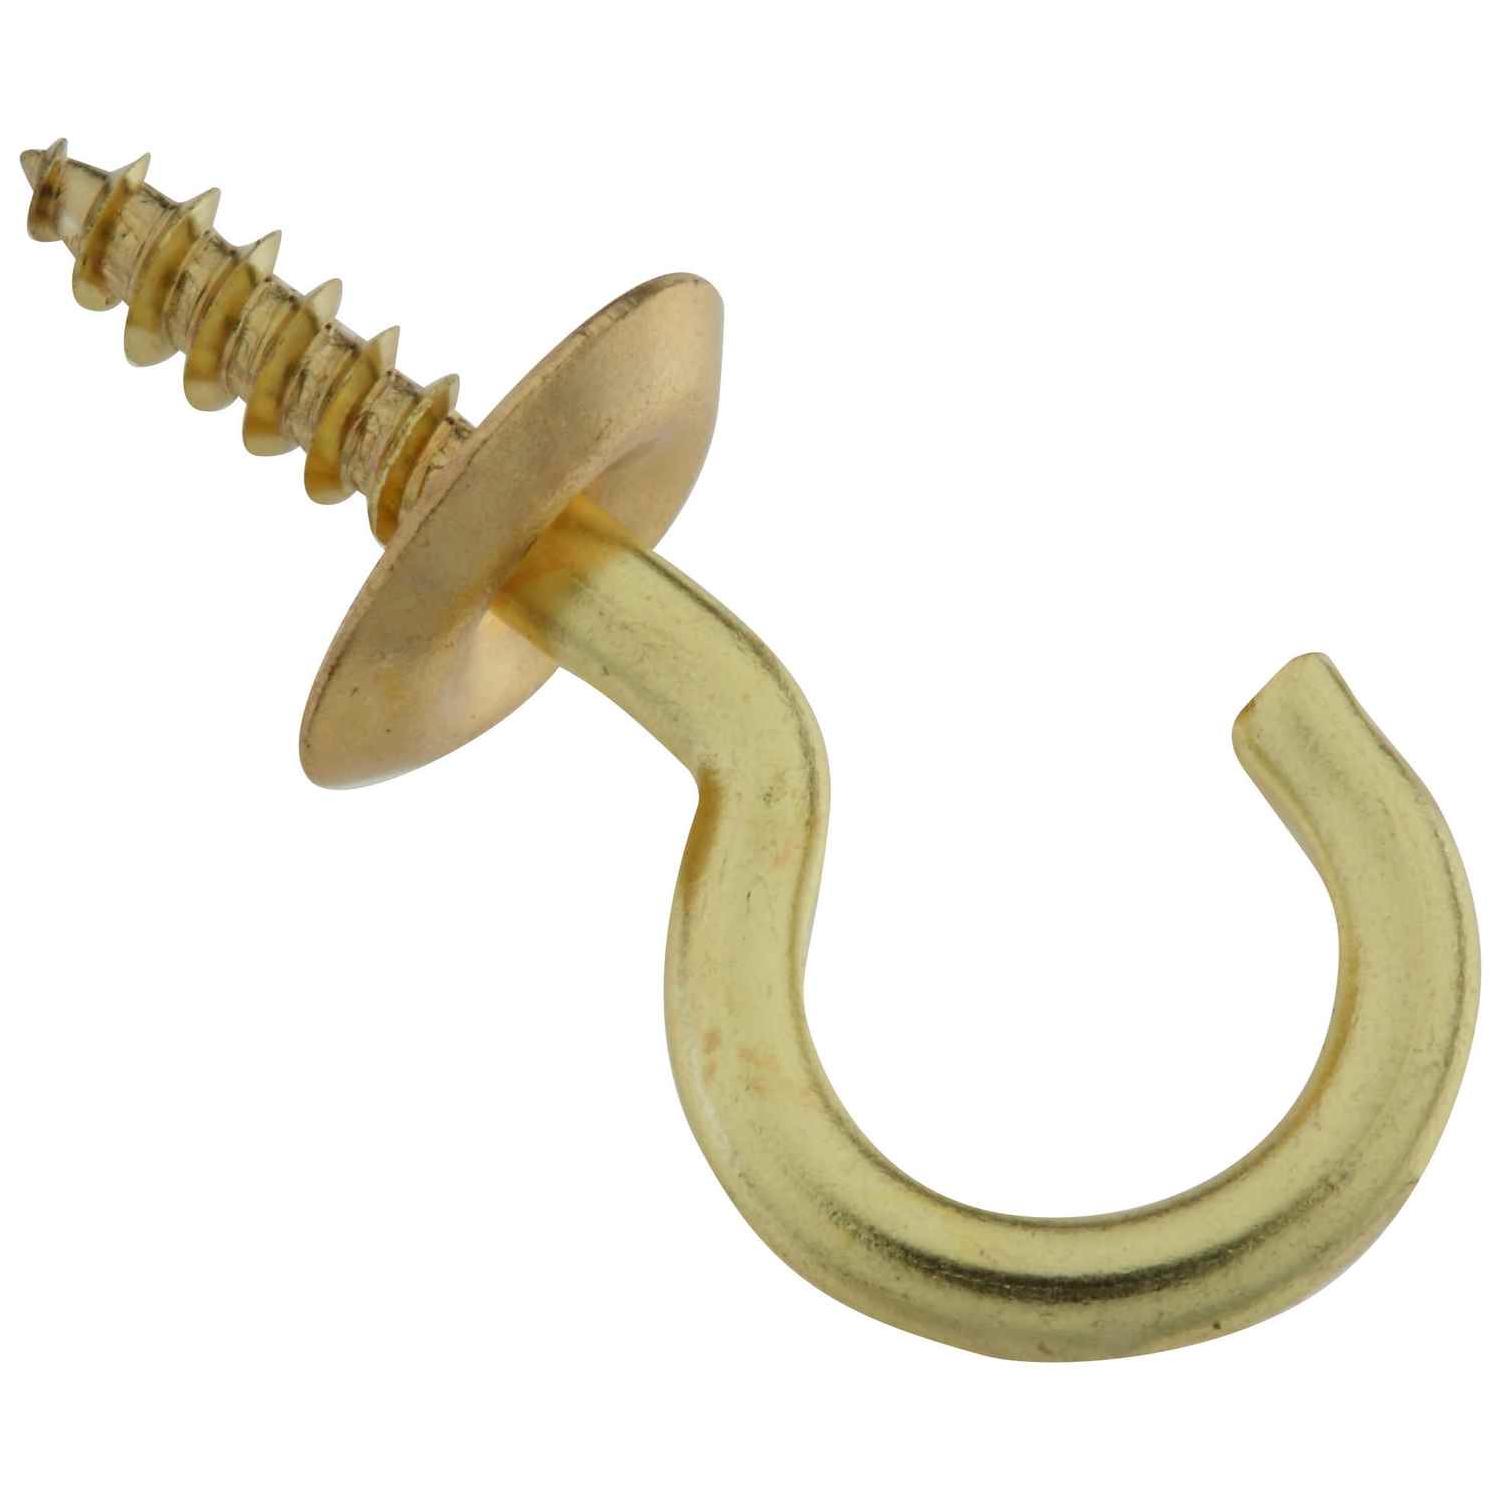 National Hardware Small Solid Brass 3/4 in. L Hook 5 pk